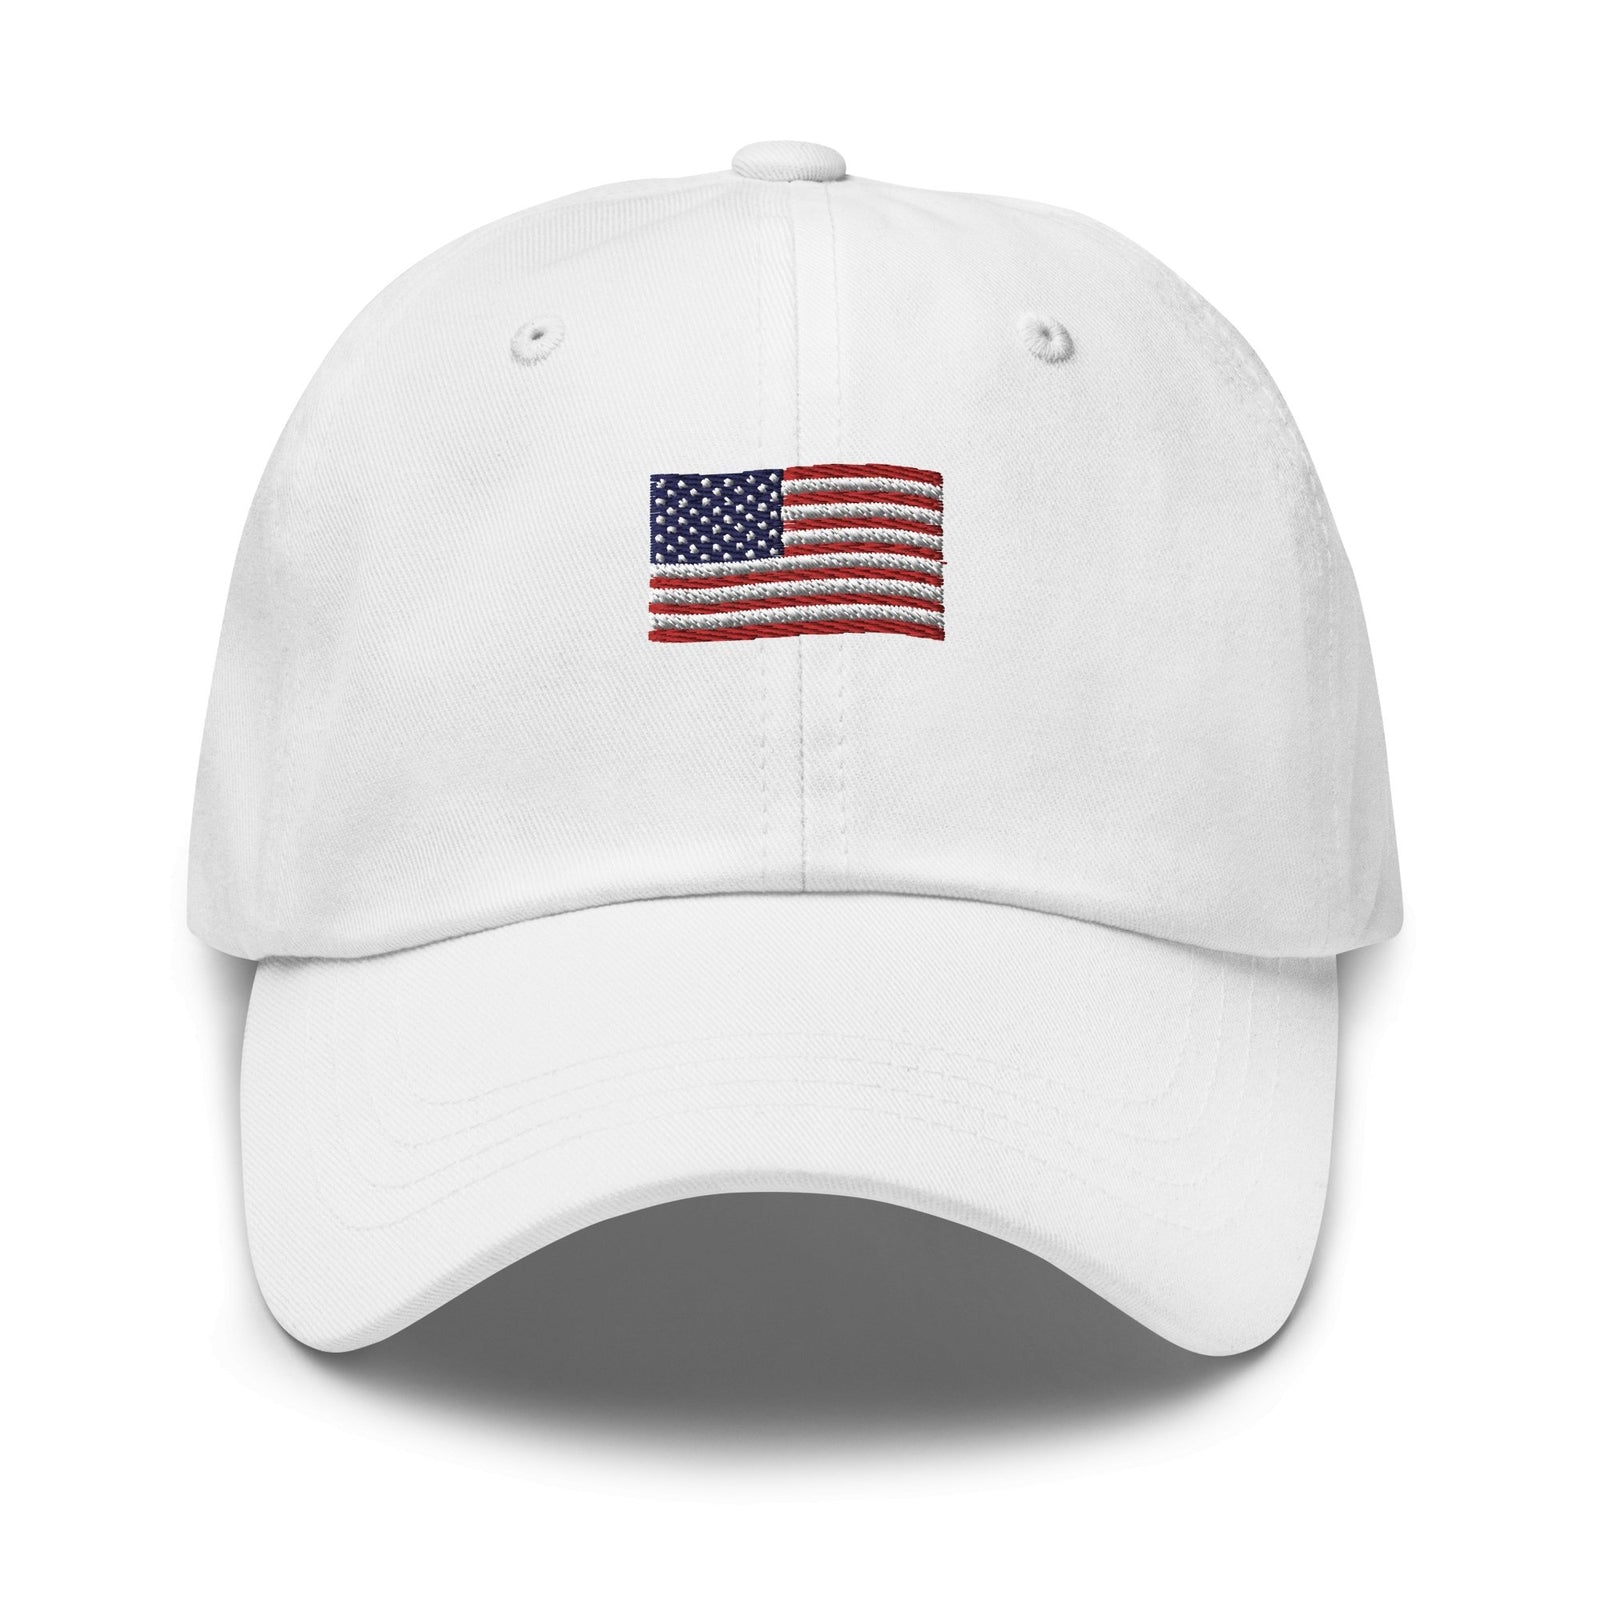 //cdn.shopify.com/s/files/1/0274/2488/2766/products/usa-flag-dad-hat-313047_5000x.jpg?v=1652422643 5000w,
    //cdn.shopify.com/s/files/1/0274/2488/2766/products/usa-flag-dad-hat-313047_4500x.jpg?v=1652422643 4500w,
    //cdn.shopify.com/s/files/1/0274/2488/2766/products/usa-flag-dad-hat-313047_4000x.jpg?v=1652422643 4000w,
    //cdn.shopify.com/s/files/1/0274/2488/2766/products/usa-flag-dad-hat-313047_3500x.jpg?v=1652422643 3500w,
    //cdn.shopify.com/s/files/1/0274/2488/2766/products/usa-flag-dad-hat-313047_3000x.jpg?v=1652422643 3000w,
    //cdn.shopify.com/s/files/1/0274/2488/2766/products/usa-flag-dad-hat-313047_2500x.jpg?v=1652422643 2500w,
    //cdn.shopify.com/s/files/1/0274/2488/2766/products/usa-flag-dad-hat-313047_2000x.jpg?v=1652422643 2000w,
    //cdn.shopify.com/s/files/1/0274/2488/2766/products/usa-flag-dad-hat-313047_1800x.jpg?v=1652422643 1800w,
    //cdn.shopify.com/s/files/1/0274/2488/2766/products/usa-flag-dad-hat-313047_1600x.jpg?v=1652422643 1600w,
    //cdn.shopify.com/s/files/1/0274/2488/2766/products/usa-flag-dad-hat-313047_1400x.jpg?v=1652422643 1400w,
    //cdn.shopify.com/s/files/1/0274/2488/2766/products/usa-flag-dad-hat-313047_1200x.jpg?v=1652422643 1200w,
    //cdn.shopify.com/s/files/1/0274/2488/2766/products/usa-flag-dad-hat-313047_1000x.jpg?v=1652422643 1000w,
    //cdn.shopify.com/s/files/1/0274/2488/2766/products/usa-flag-dad-hat-313047_800x.jpg?v=1652422643 800w,
    //cdn.shopify.com/s/files/1/0274/2488/2766/products/usa-flag-dad-hat-313047_600x.jpg?v=1652422643 600w,
    //cdn.shopify.com/s/files/1/0274/2488/2766/products/usa-flag-dad-hat-313047_400x.jpg?v=1652422643 400w,
    //cdn.shopify.com/s/files/1/0274/2488/2766/products/usa-flag-dad-hat-313047_200x.jpg?v=1652422643 200w